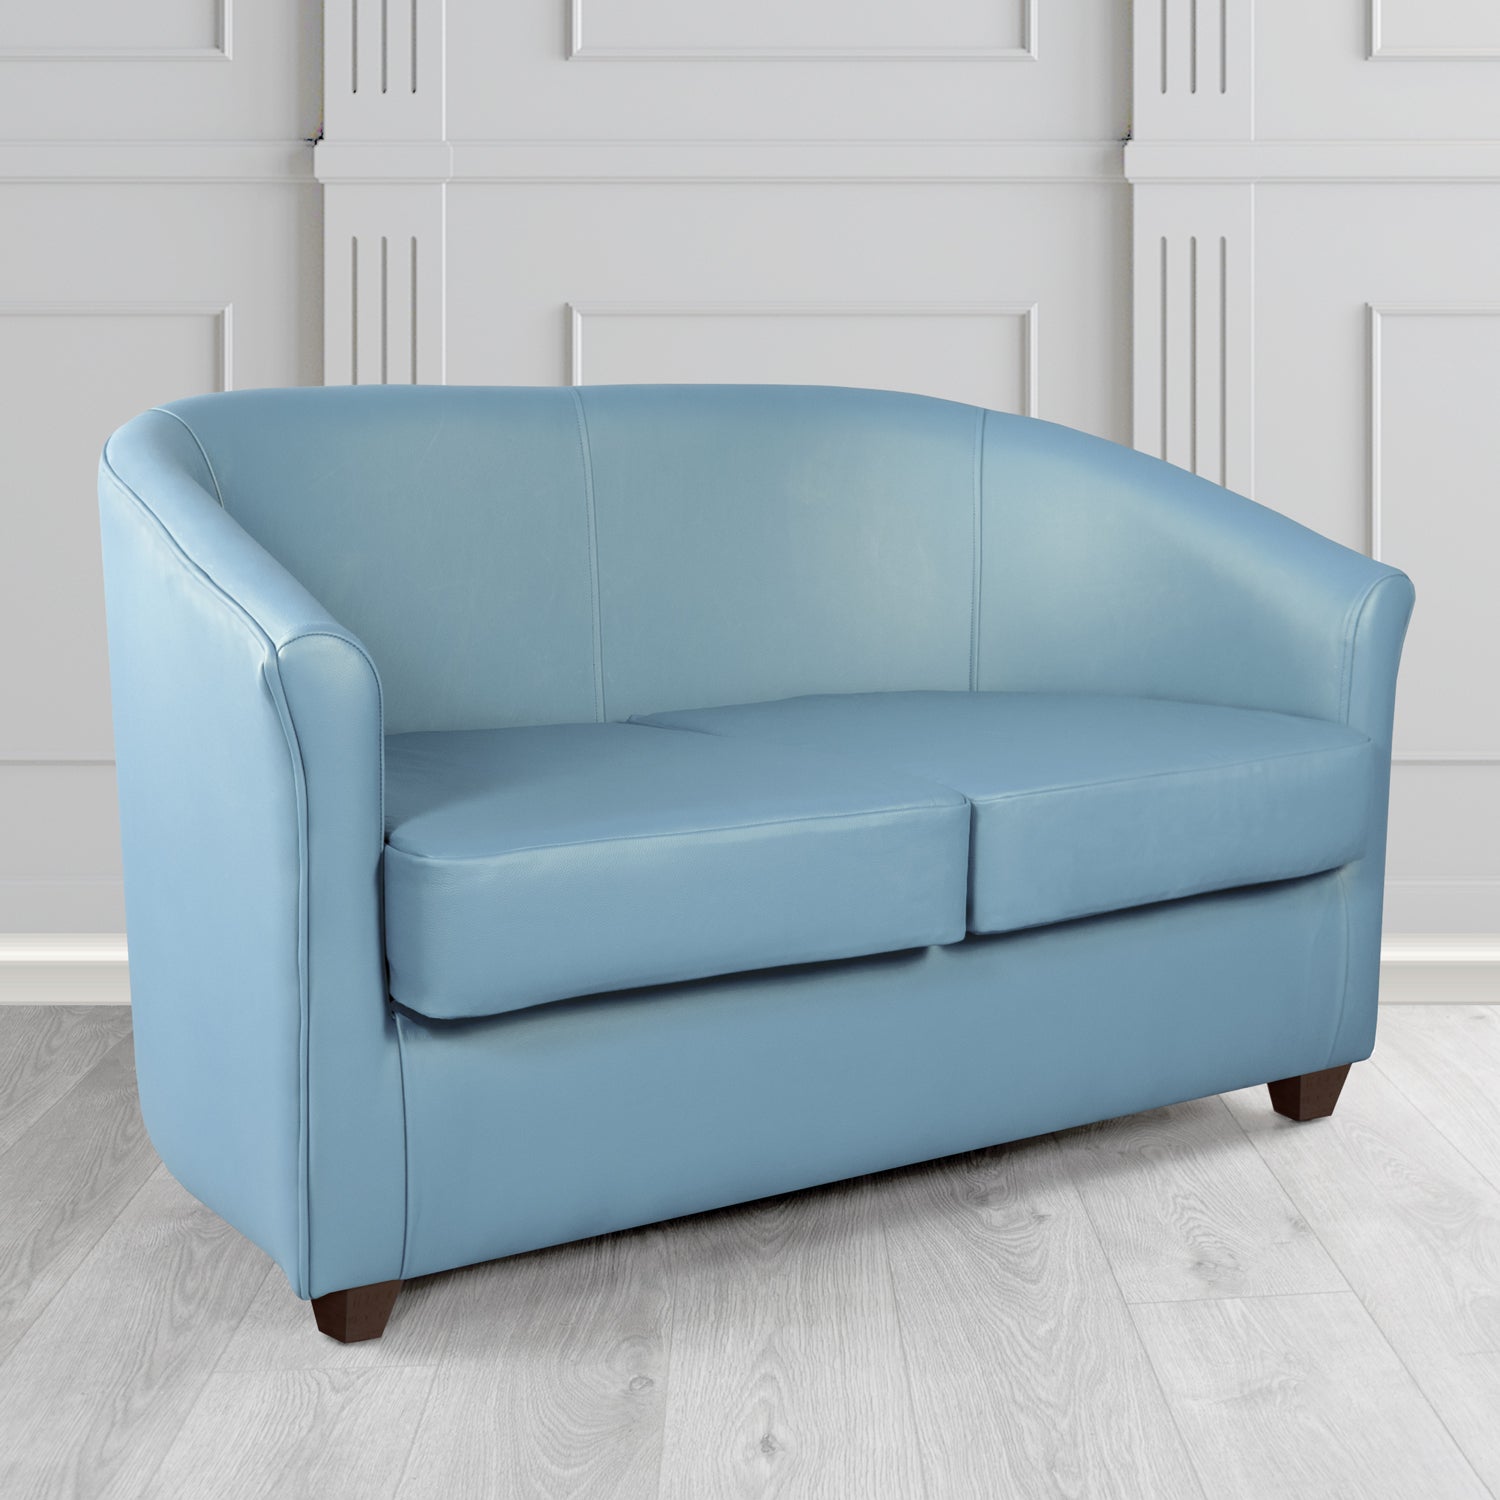 Cannes 2 Seater Tub Sofa in Just Colour Cool Blue Crib 5 Faux Leather - The Tub Chair Shop